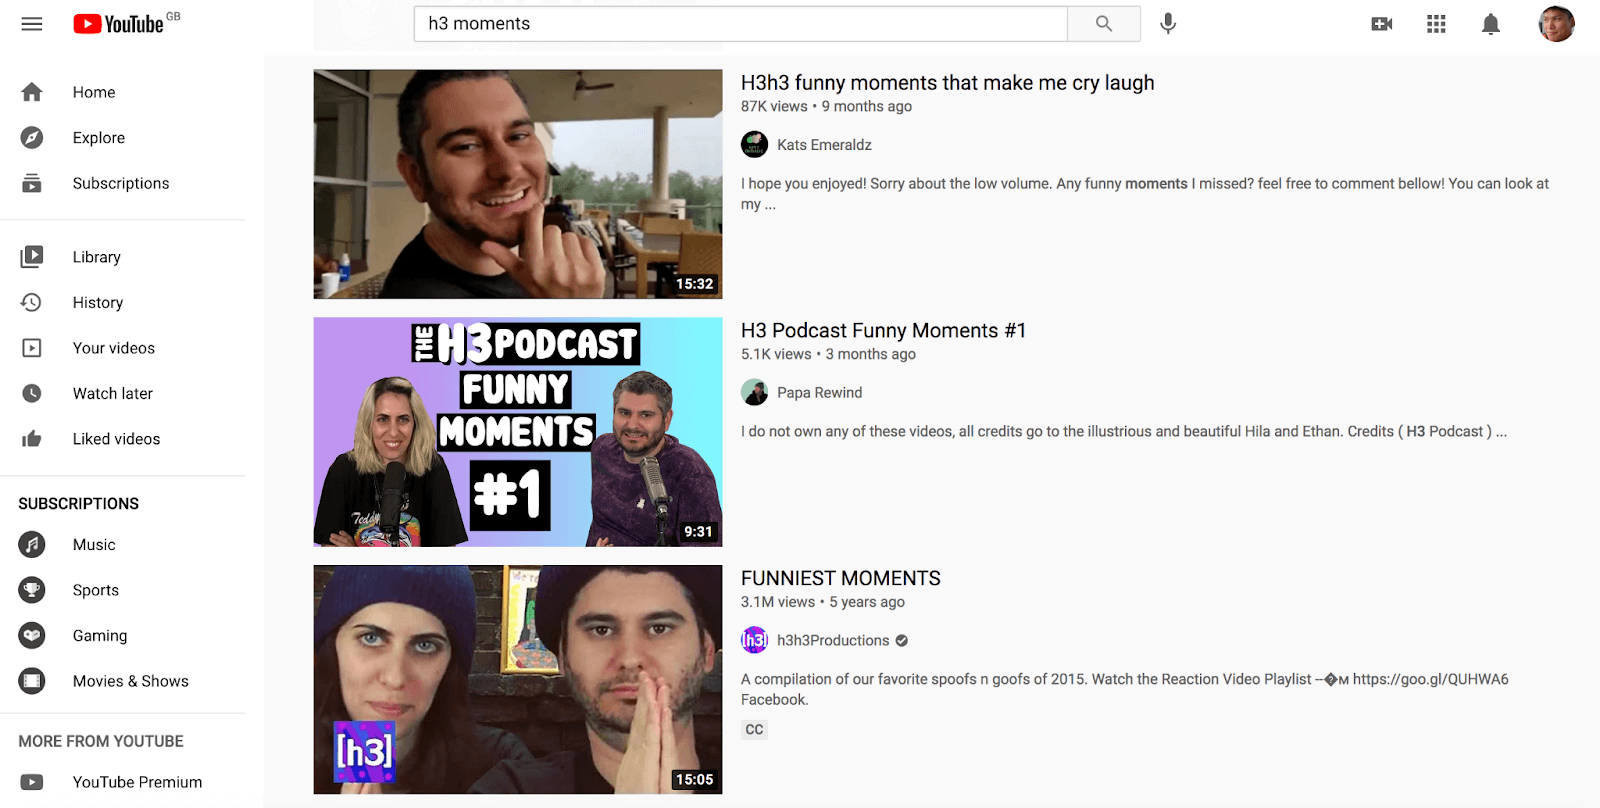 H3 video podcasts